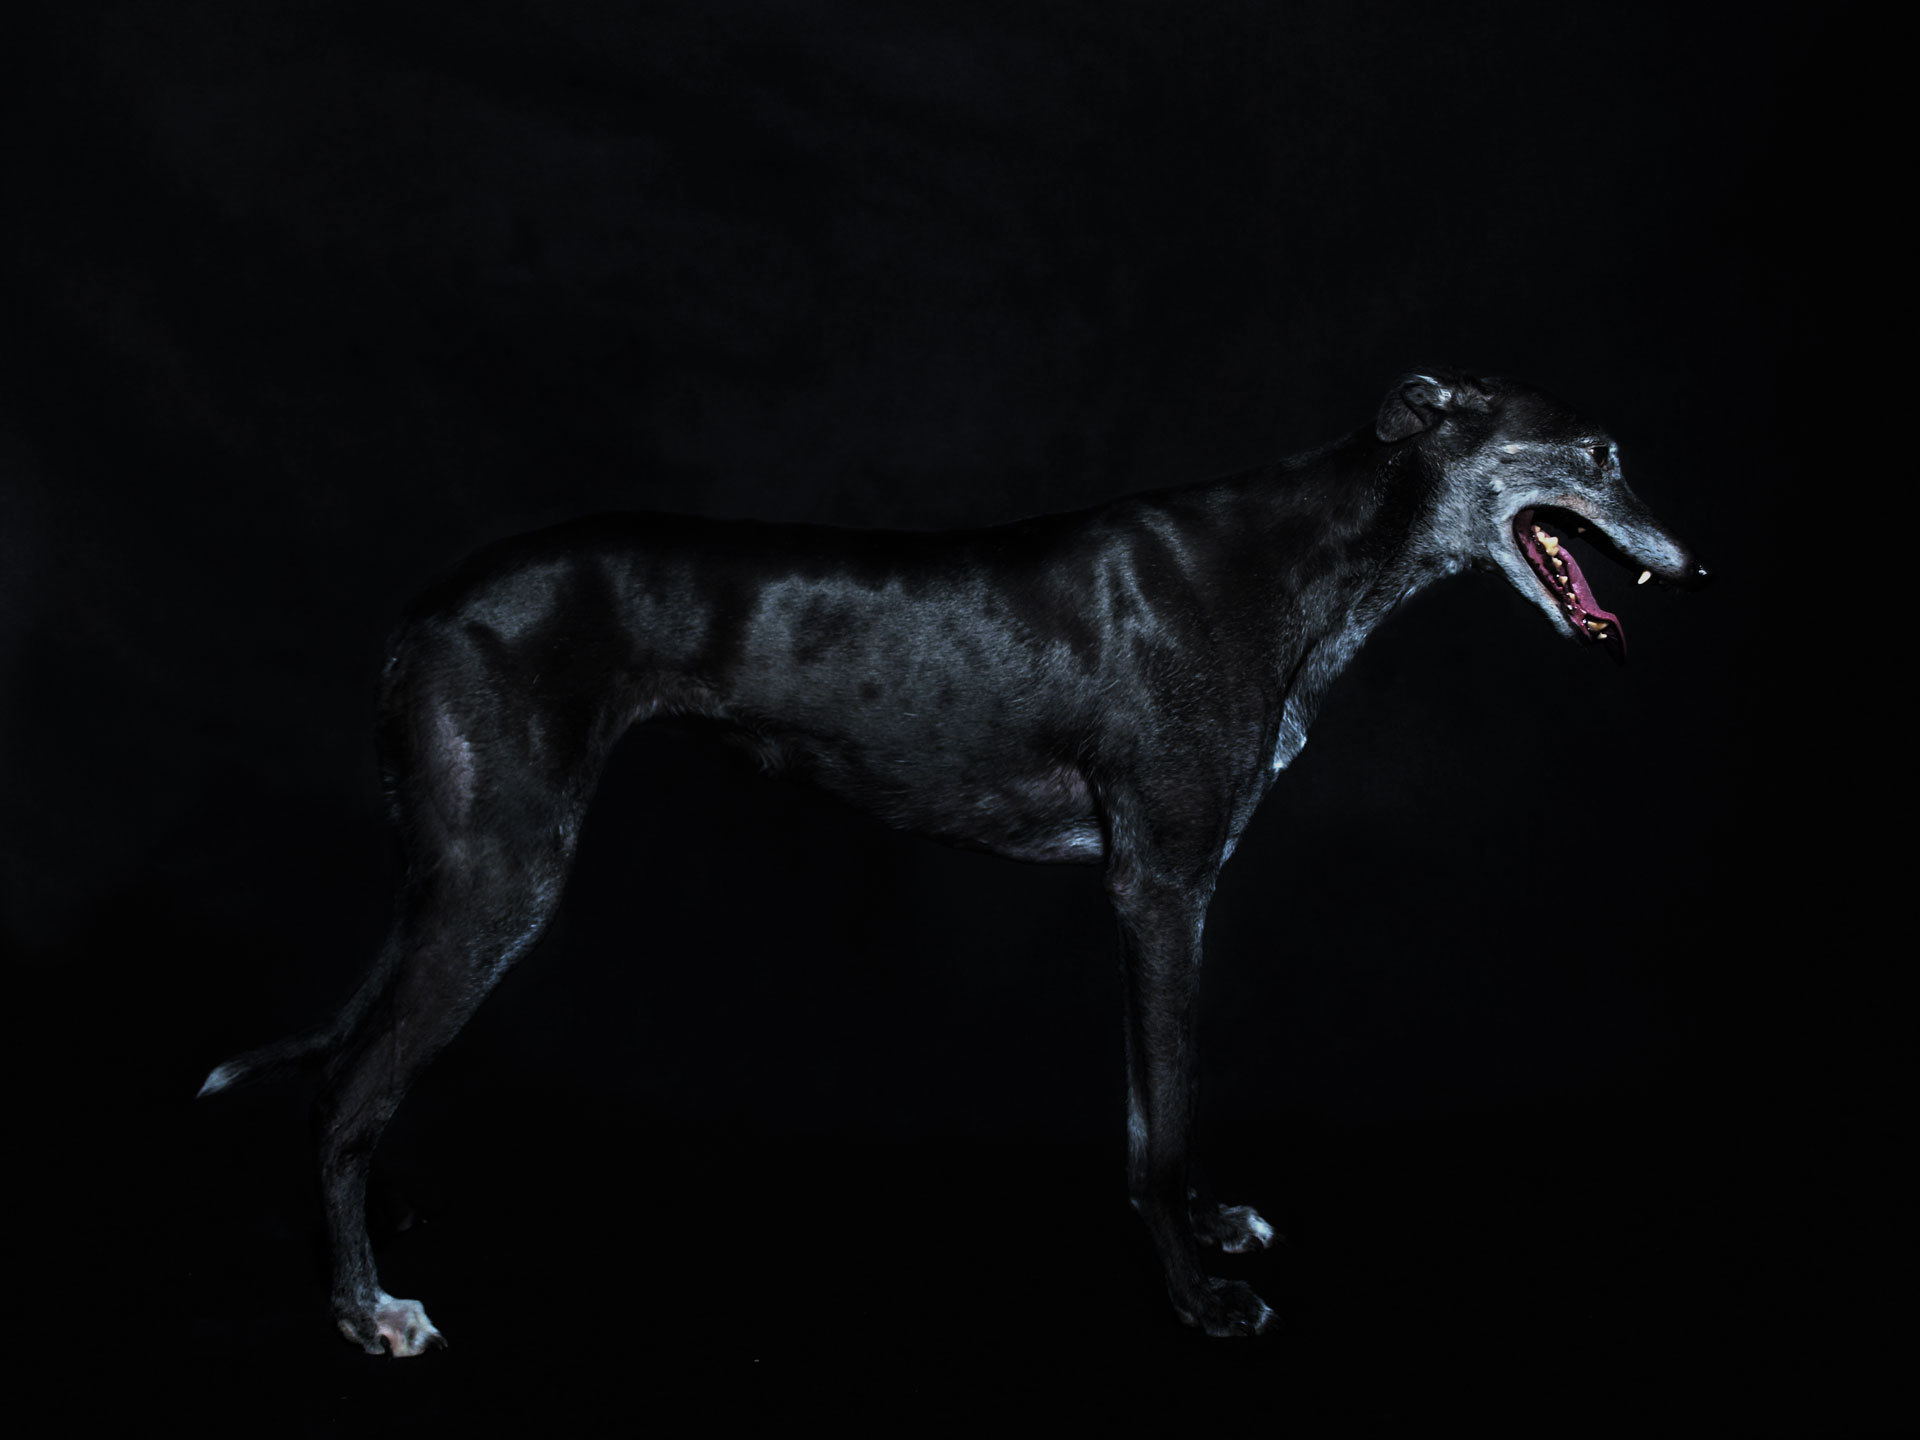 Black Galgo Espanol wallpapers and